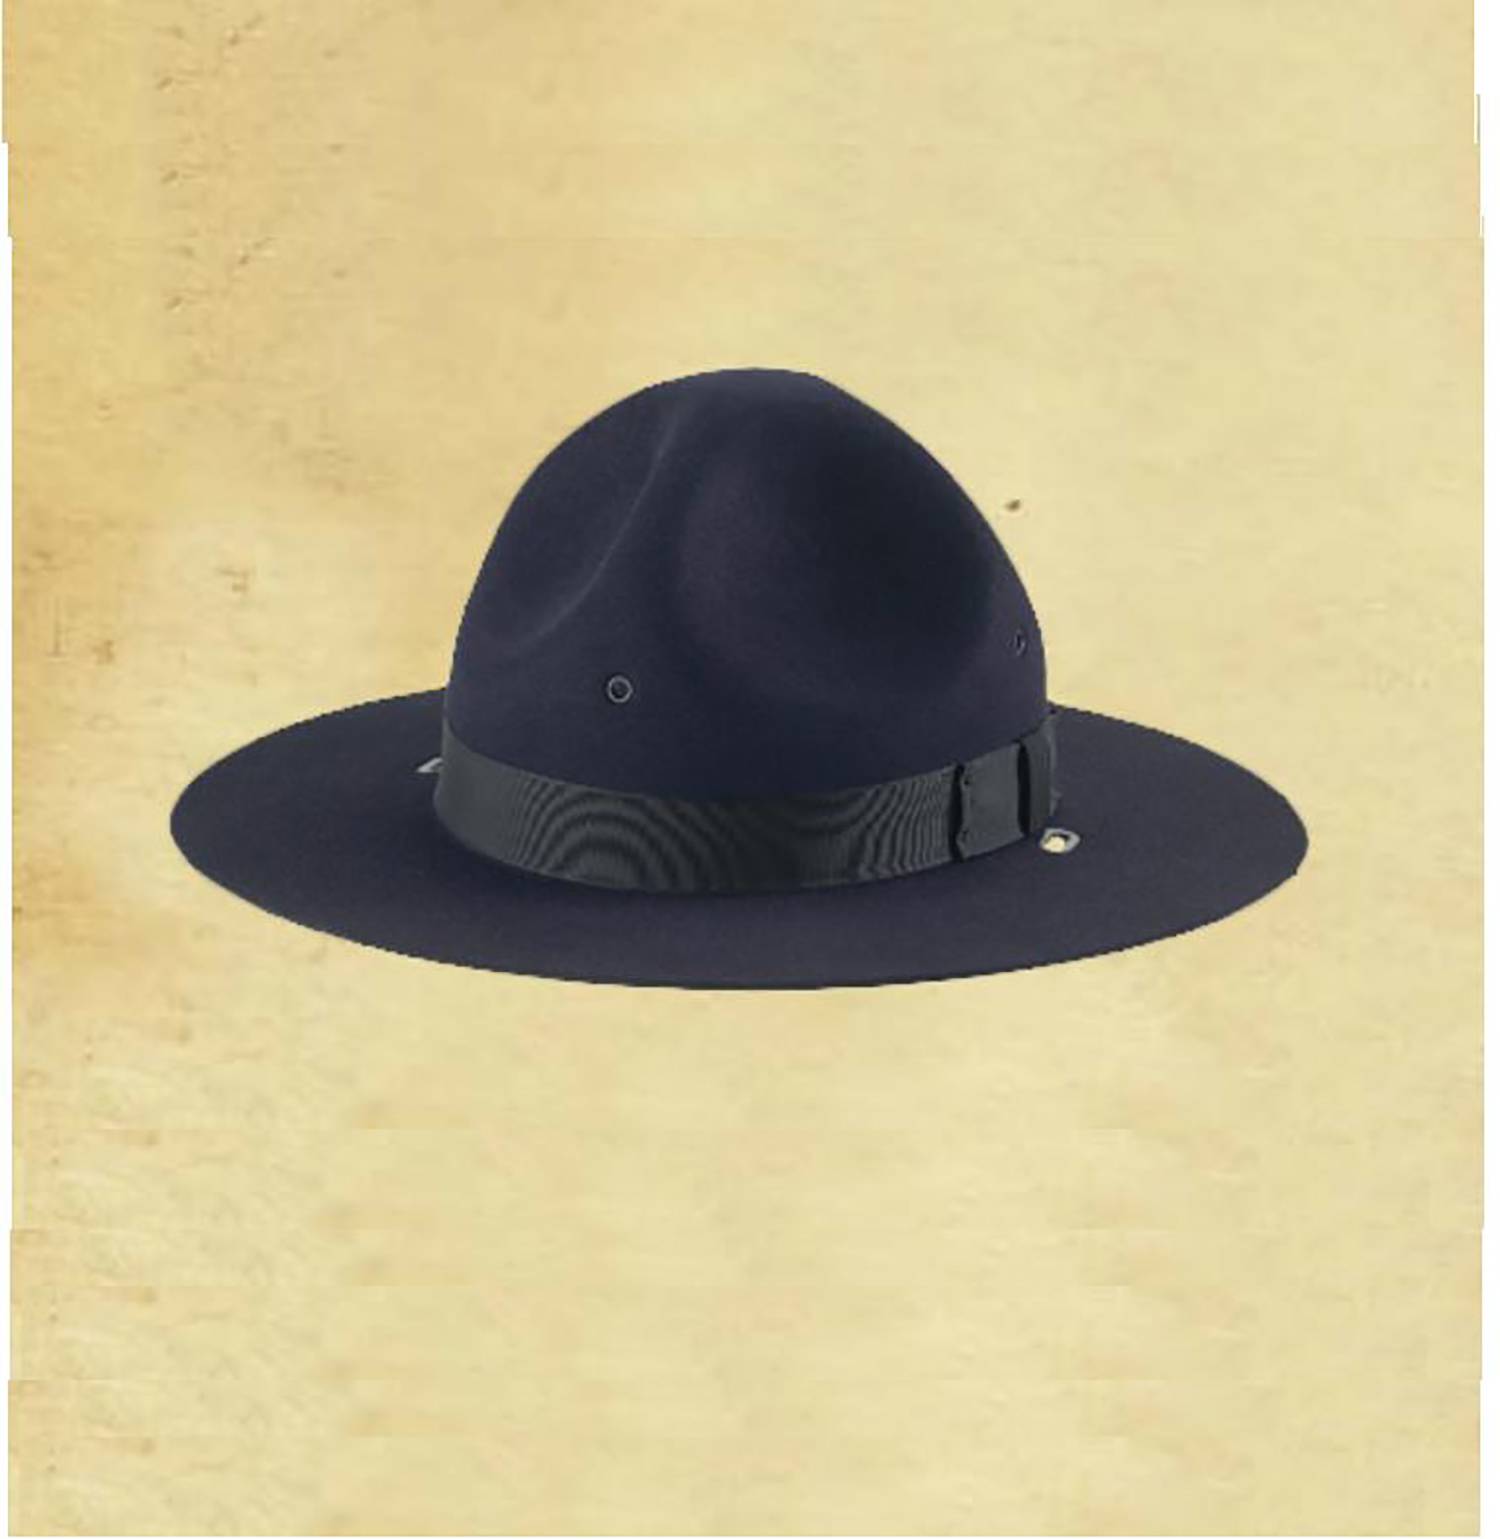 W. Alboum Hat Felt Campaign Hat with Adjustable Leather Chin